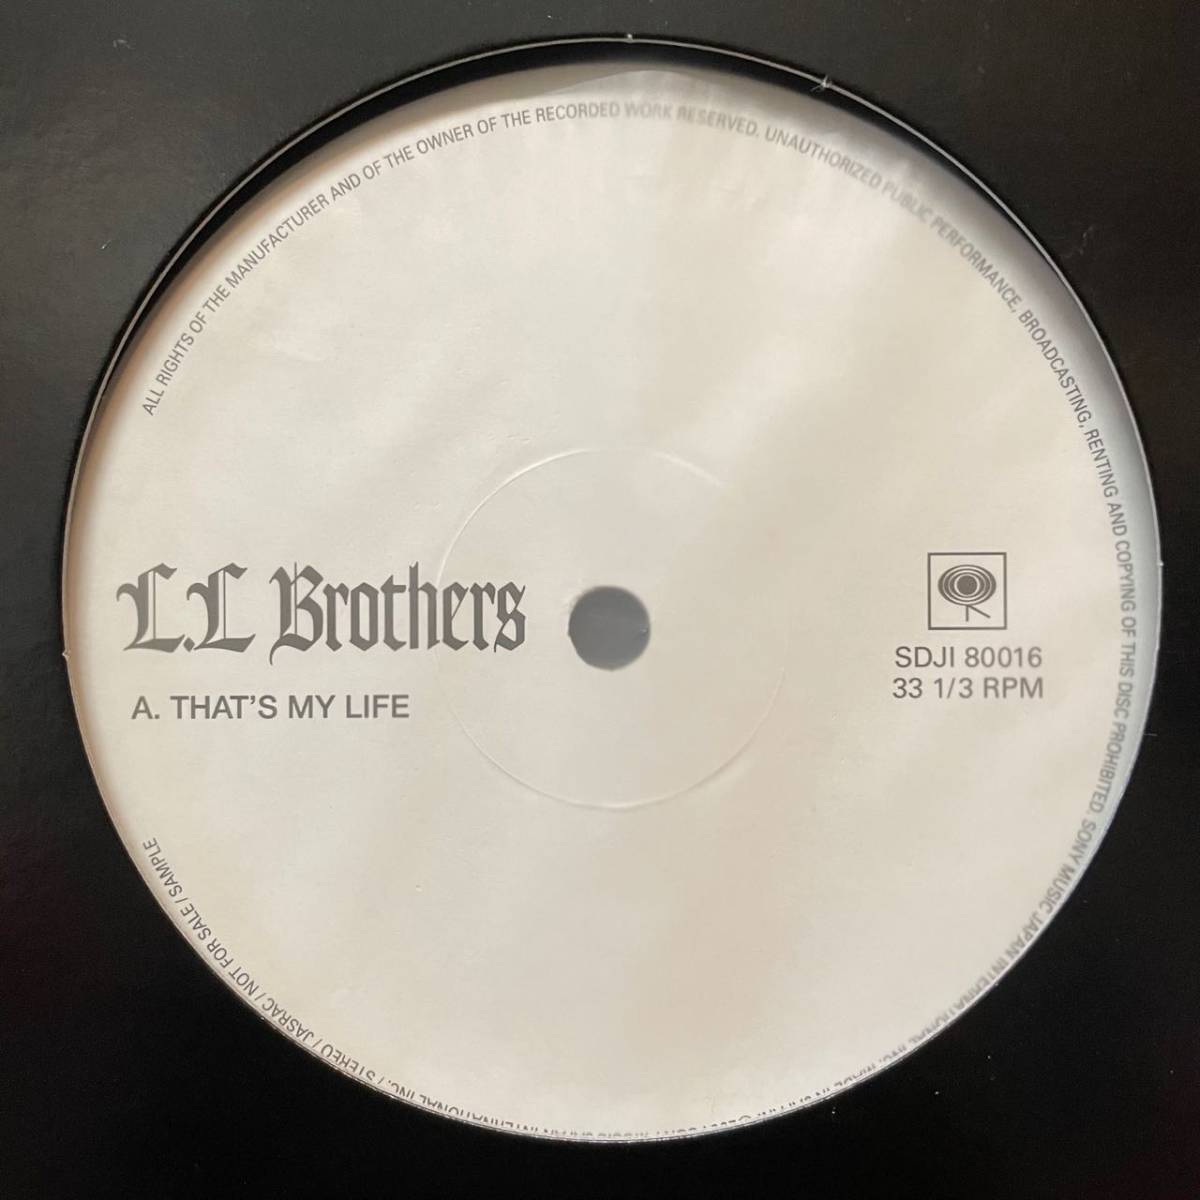 LLブラザーズ Bounce wit me/Marry Me 希少 LPレコード L.L BROTHERS -